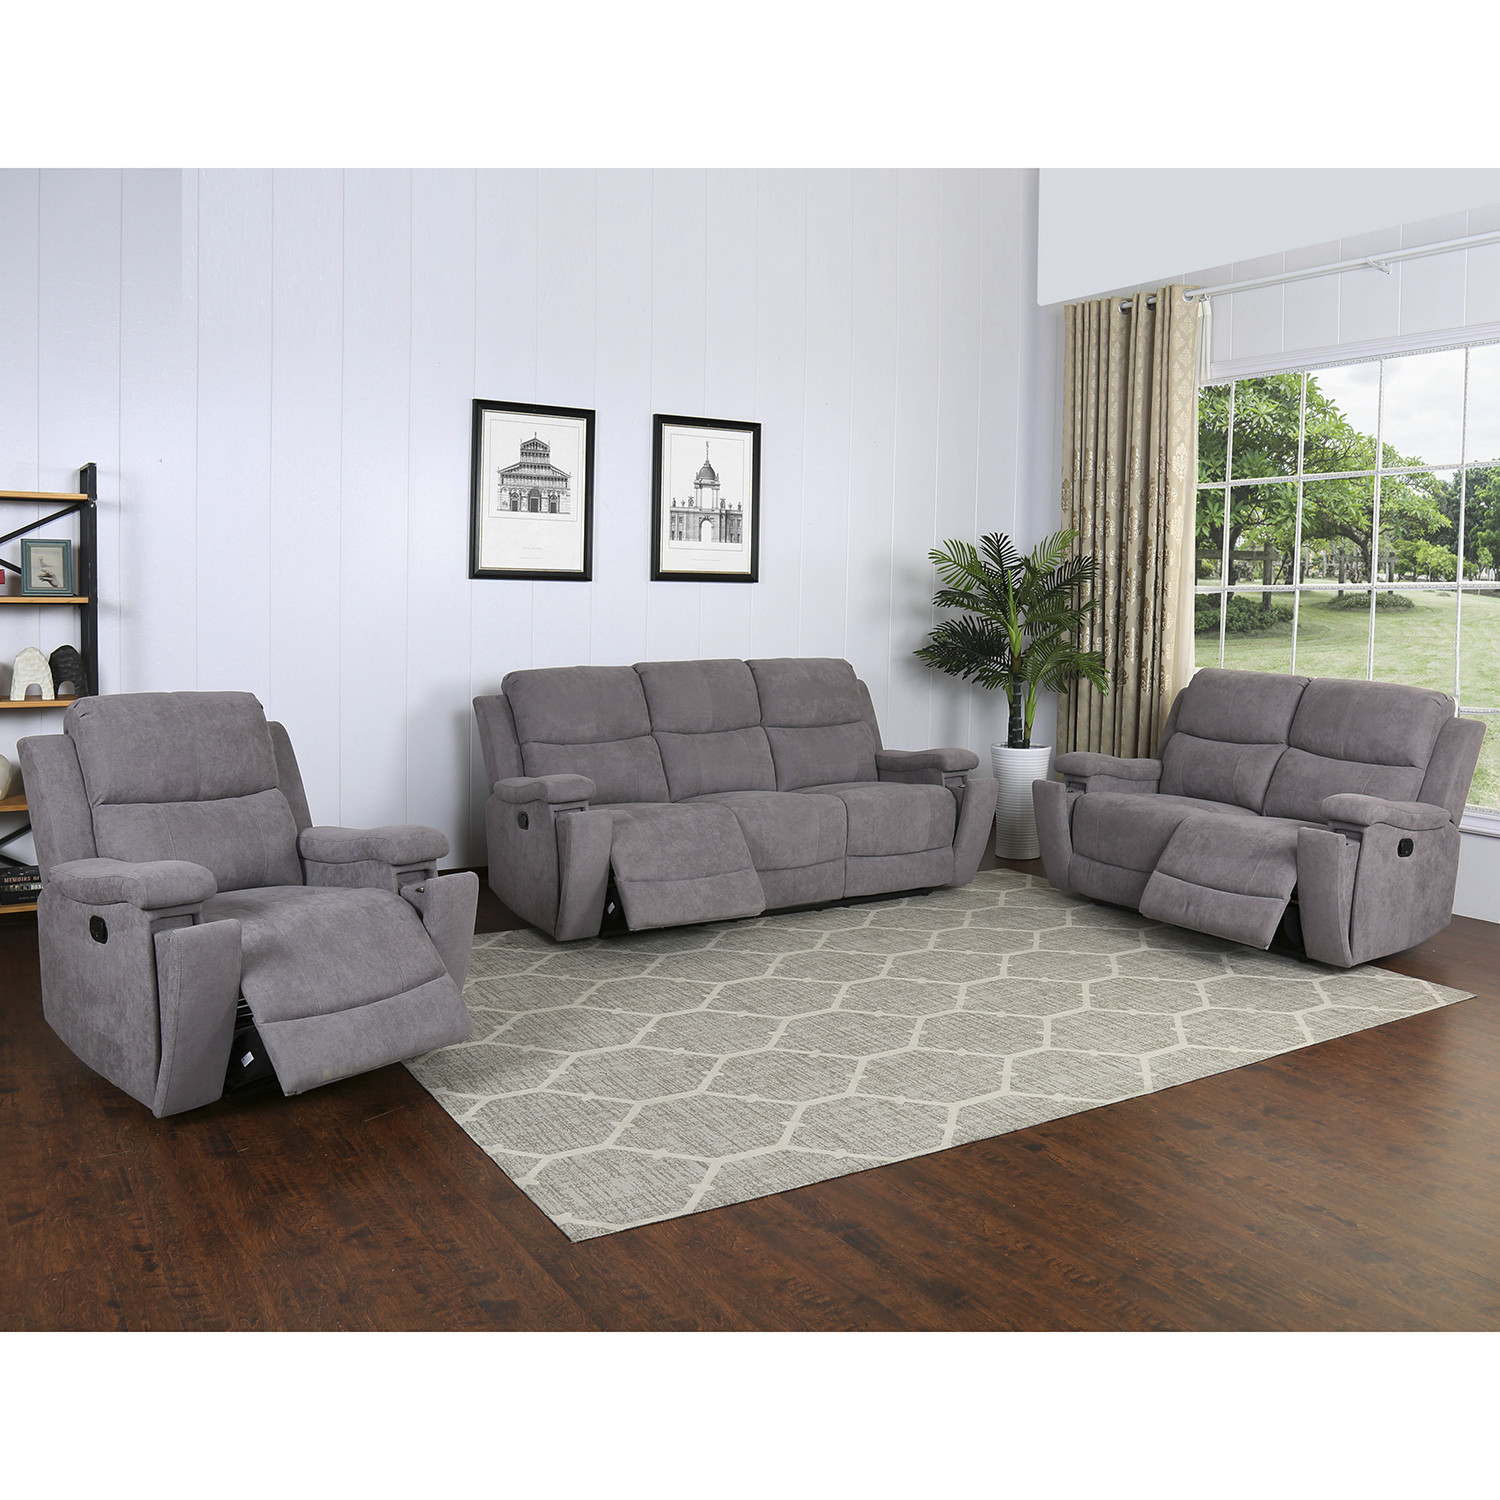 Ledbury Grey Fabric Manual Recliner Chair with Footrest Image 5